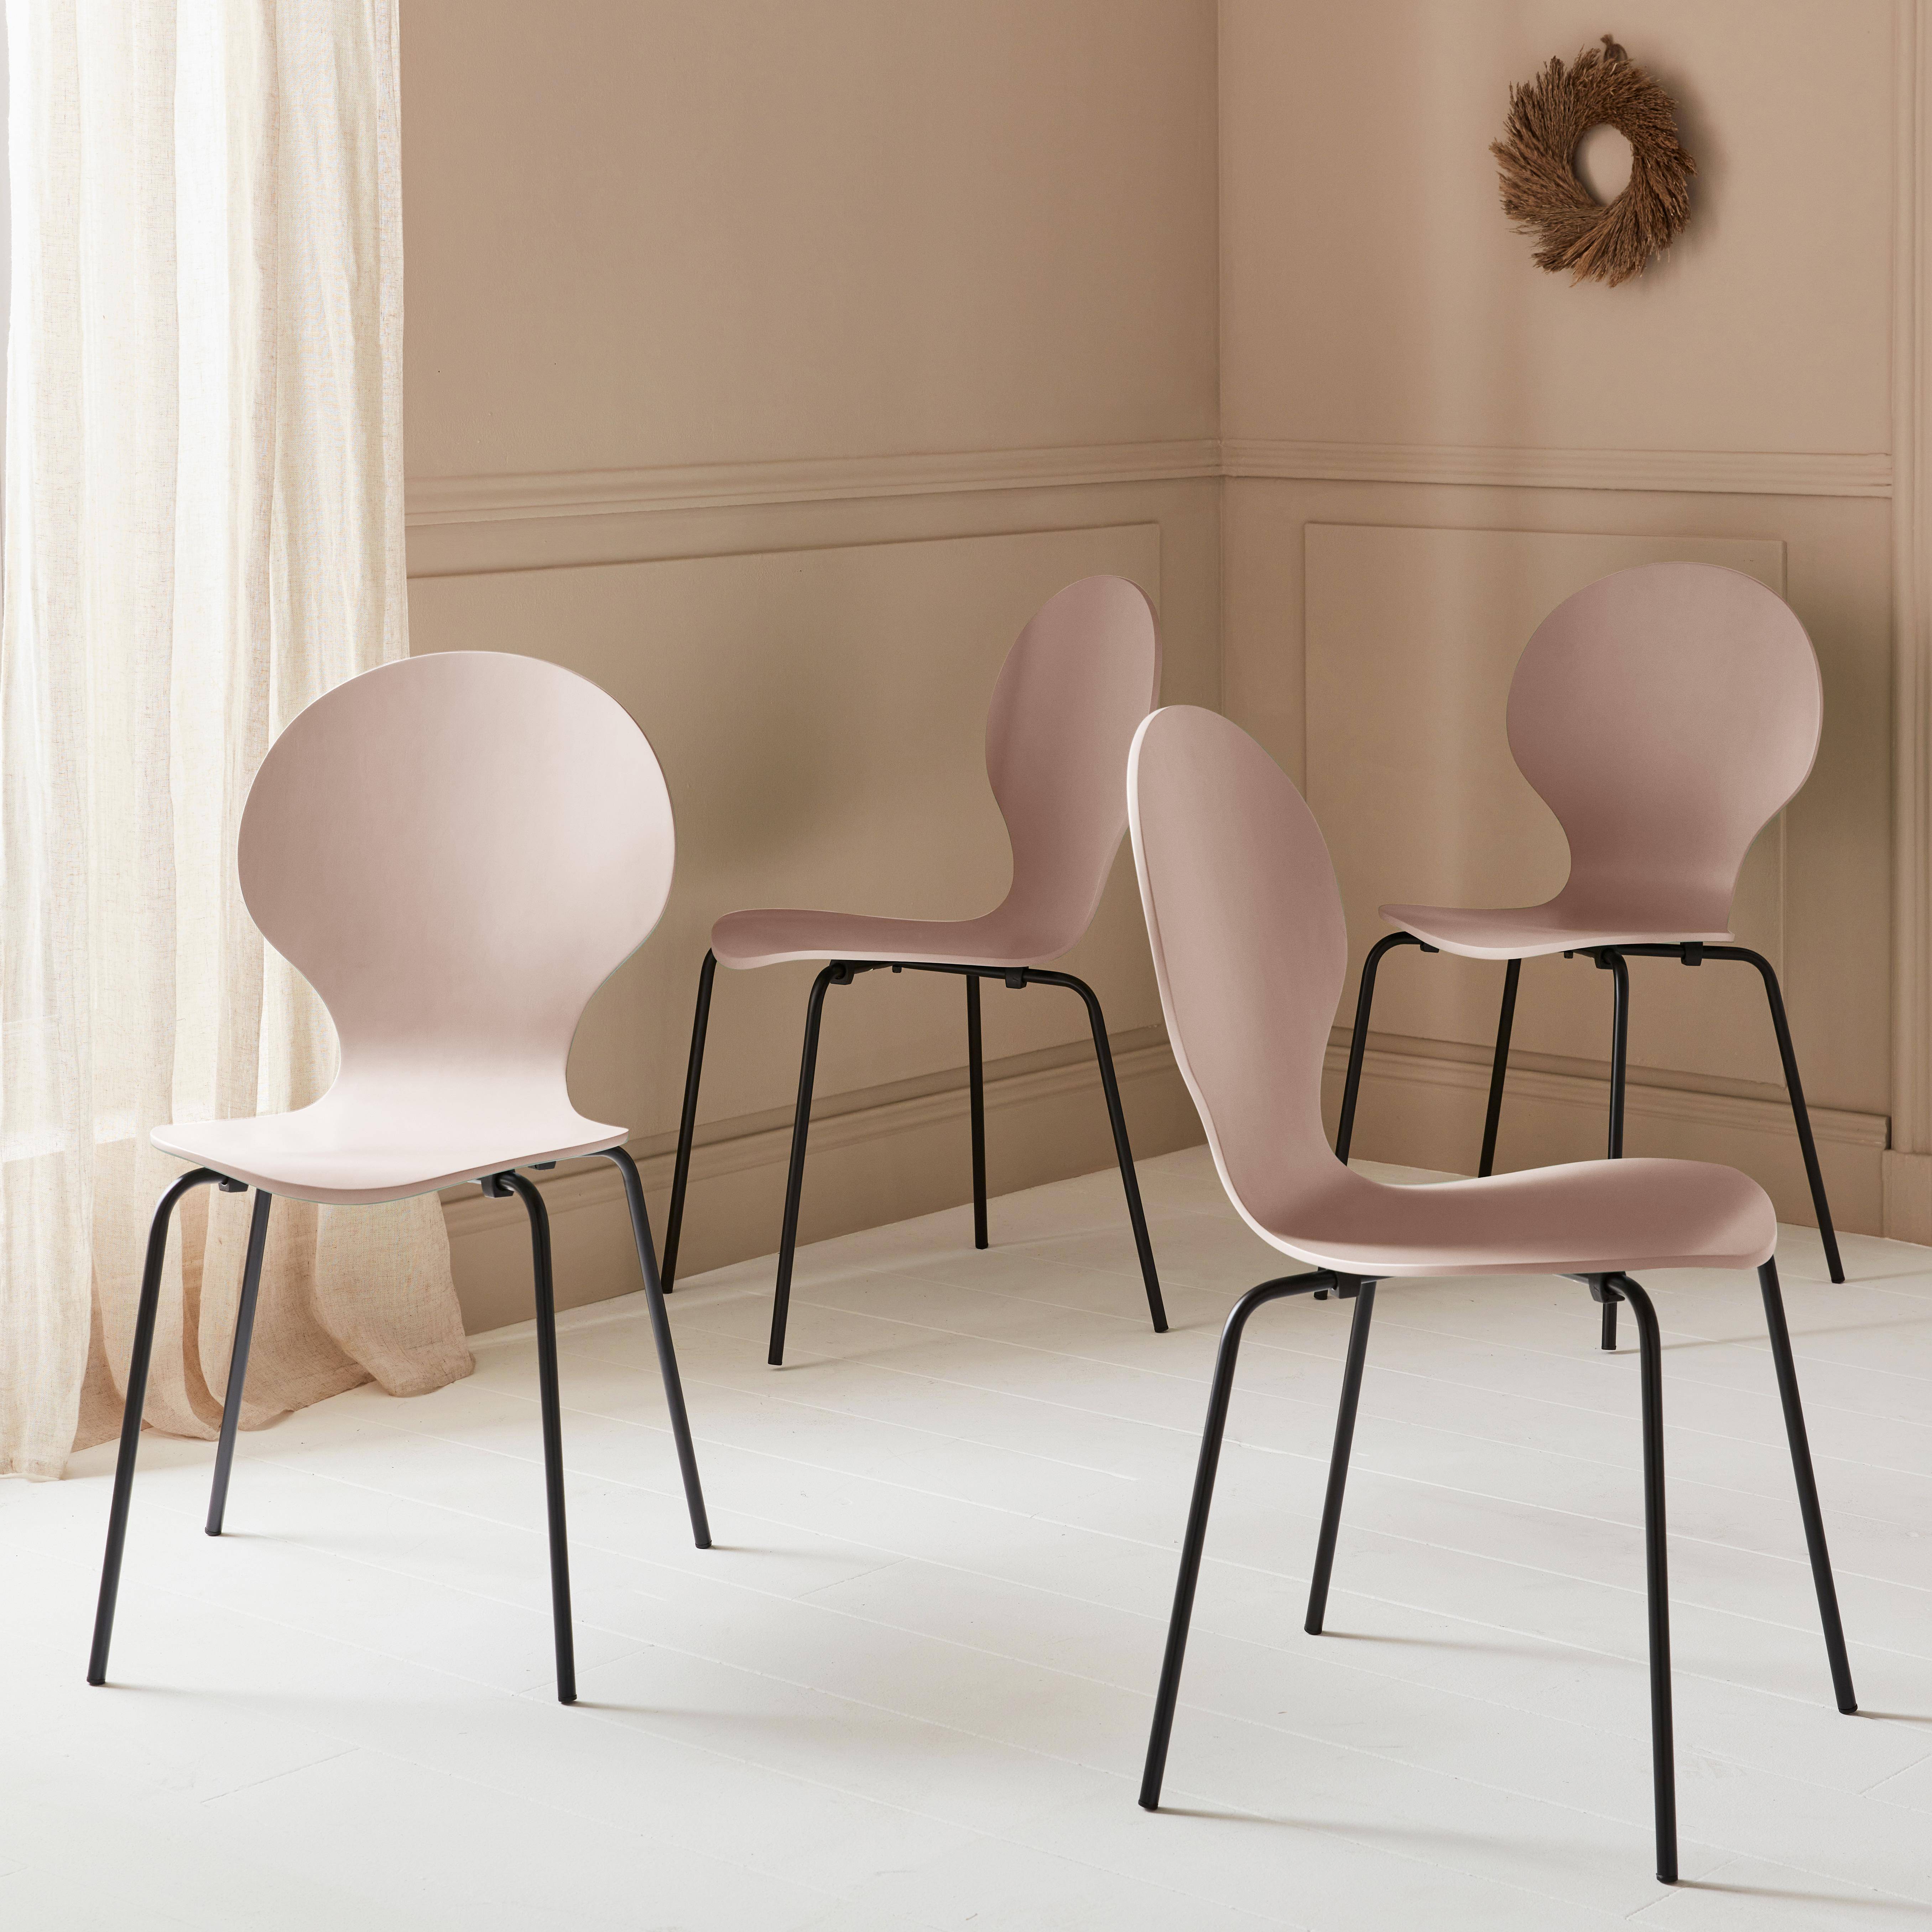 Set of 4 stackable Retro Chairs, Wood and Plywood, L43xW48xH87cm, pink,sweeek,Photo1